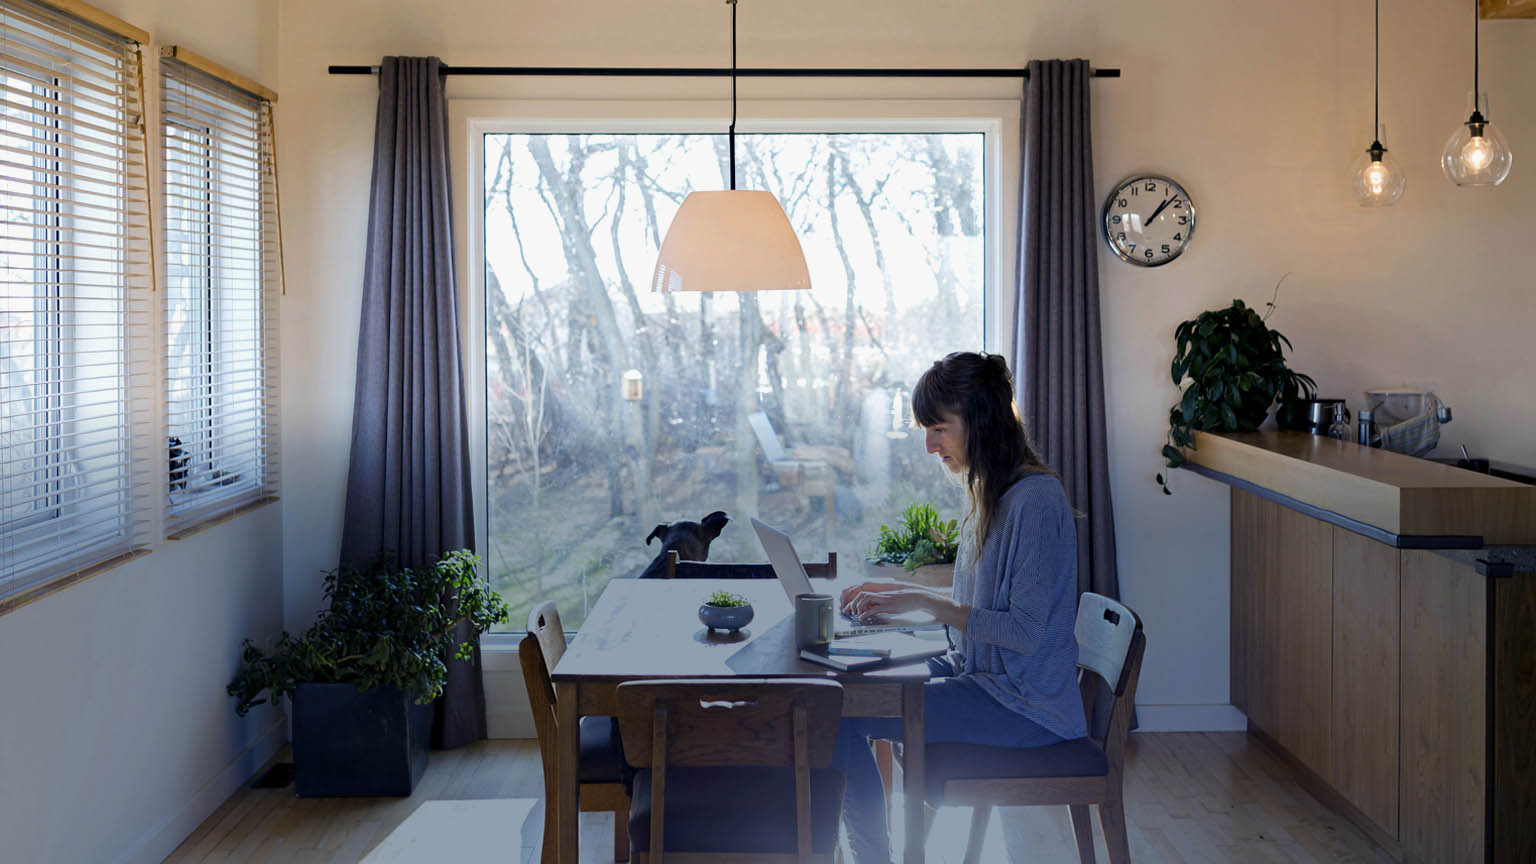 Working from home because of COVID-19? Here are 10 ways to spend your time, Science